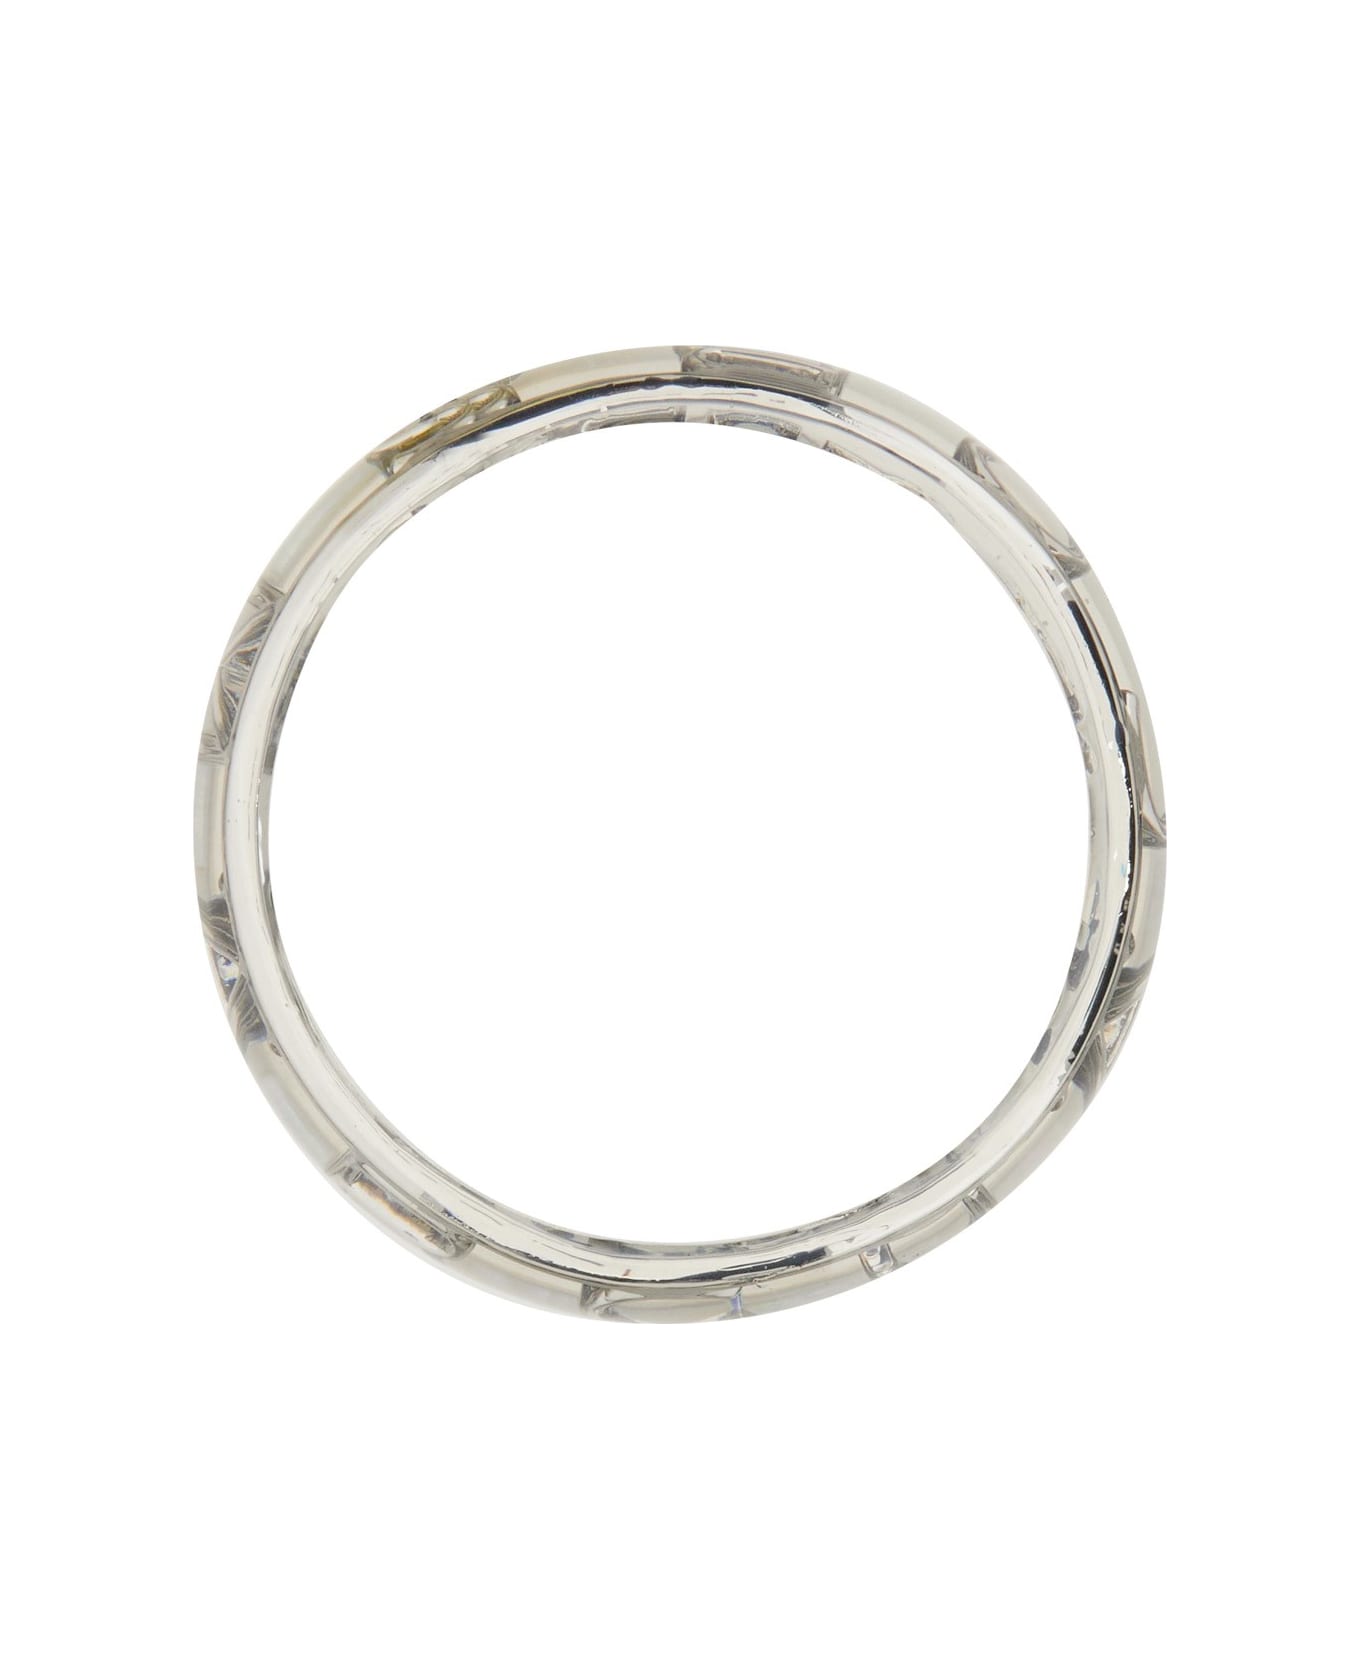 Marc Jacobs The Monogram Bangle Bracelet - Clear Silver ブレスレット